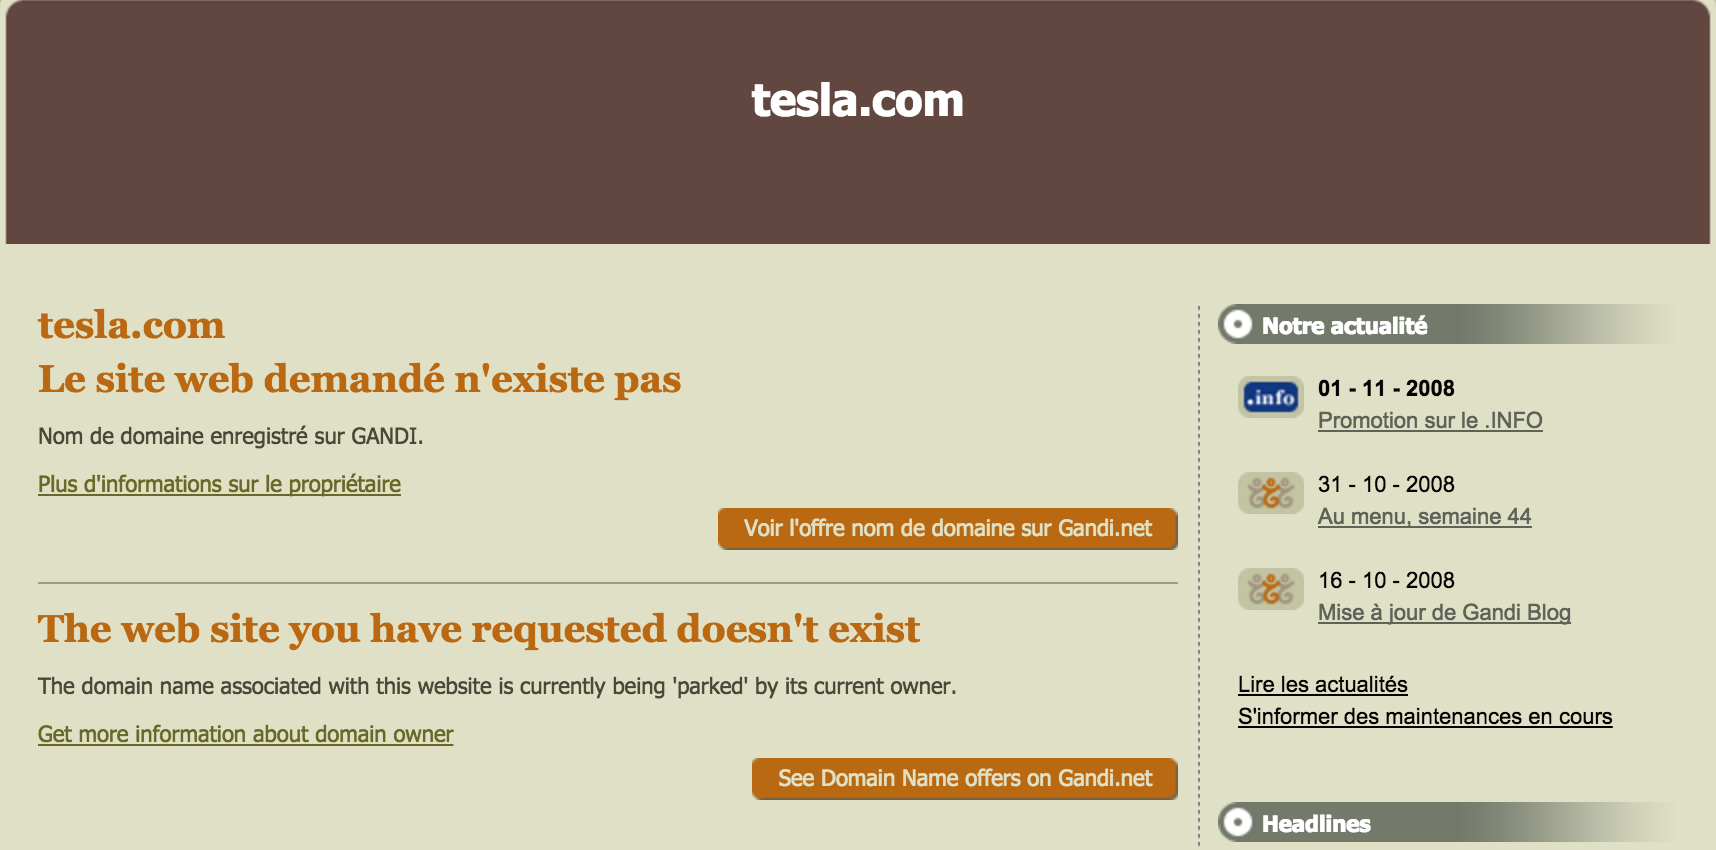 Tesla.com has gone largely unused for years. This is what the site looked like only a few years ago. (via the Internet Archive)